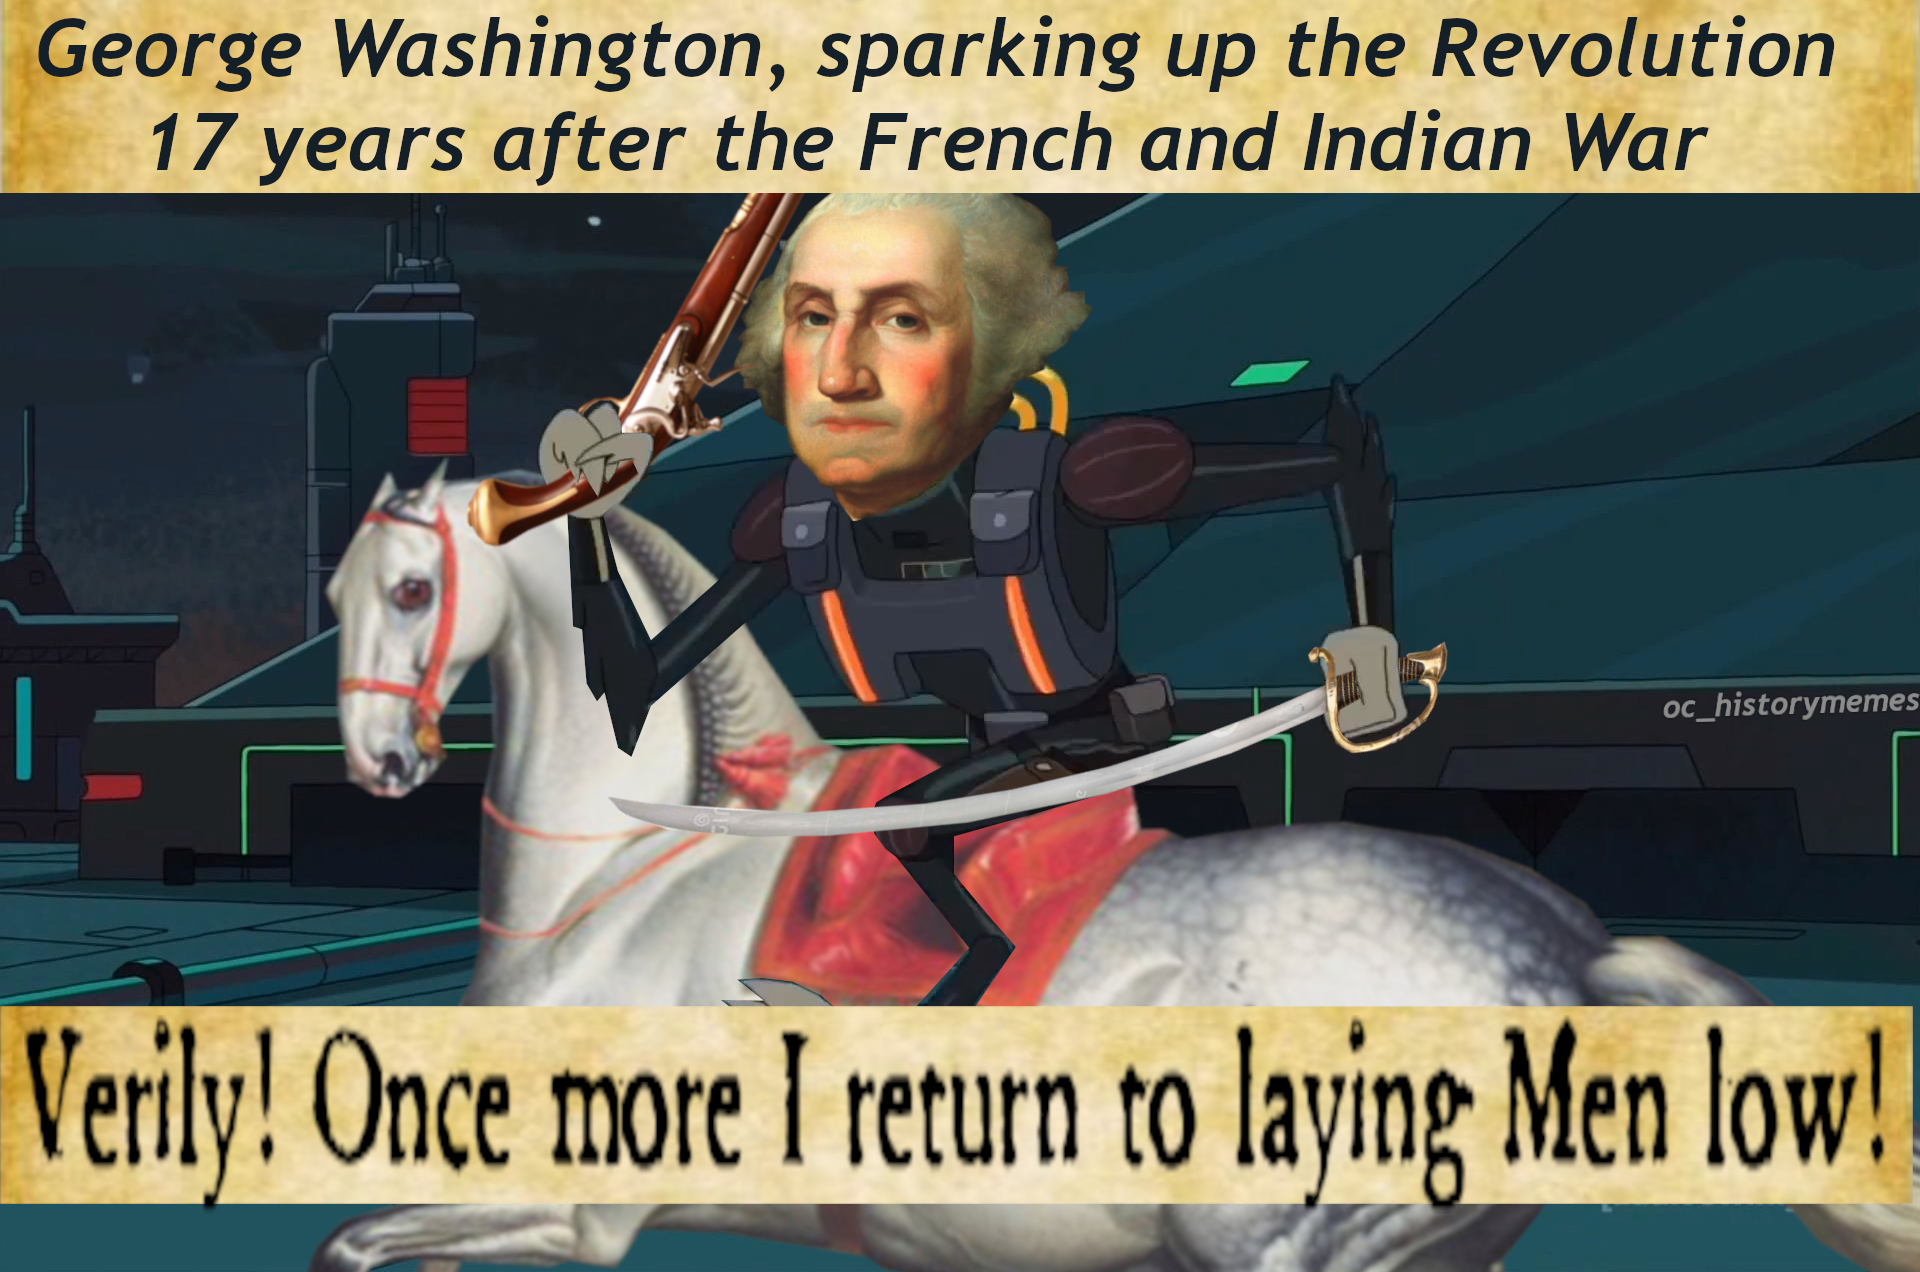 george washington - George Washington, sparking up the Revolution 17 years after the French and Indian War oc_historymemes Verily! Once more I return to laying Men low!